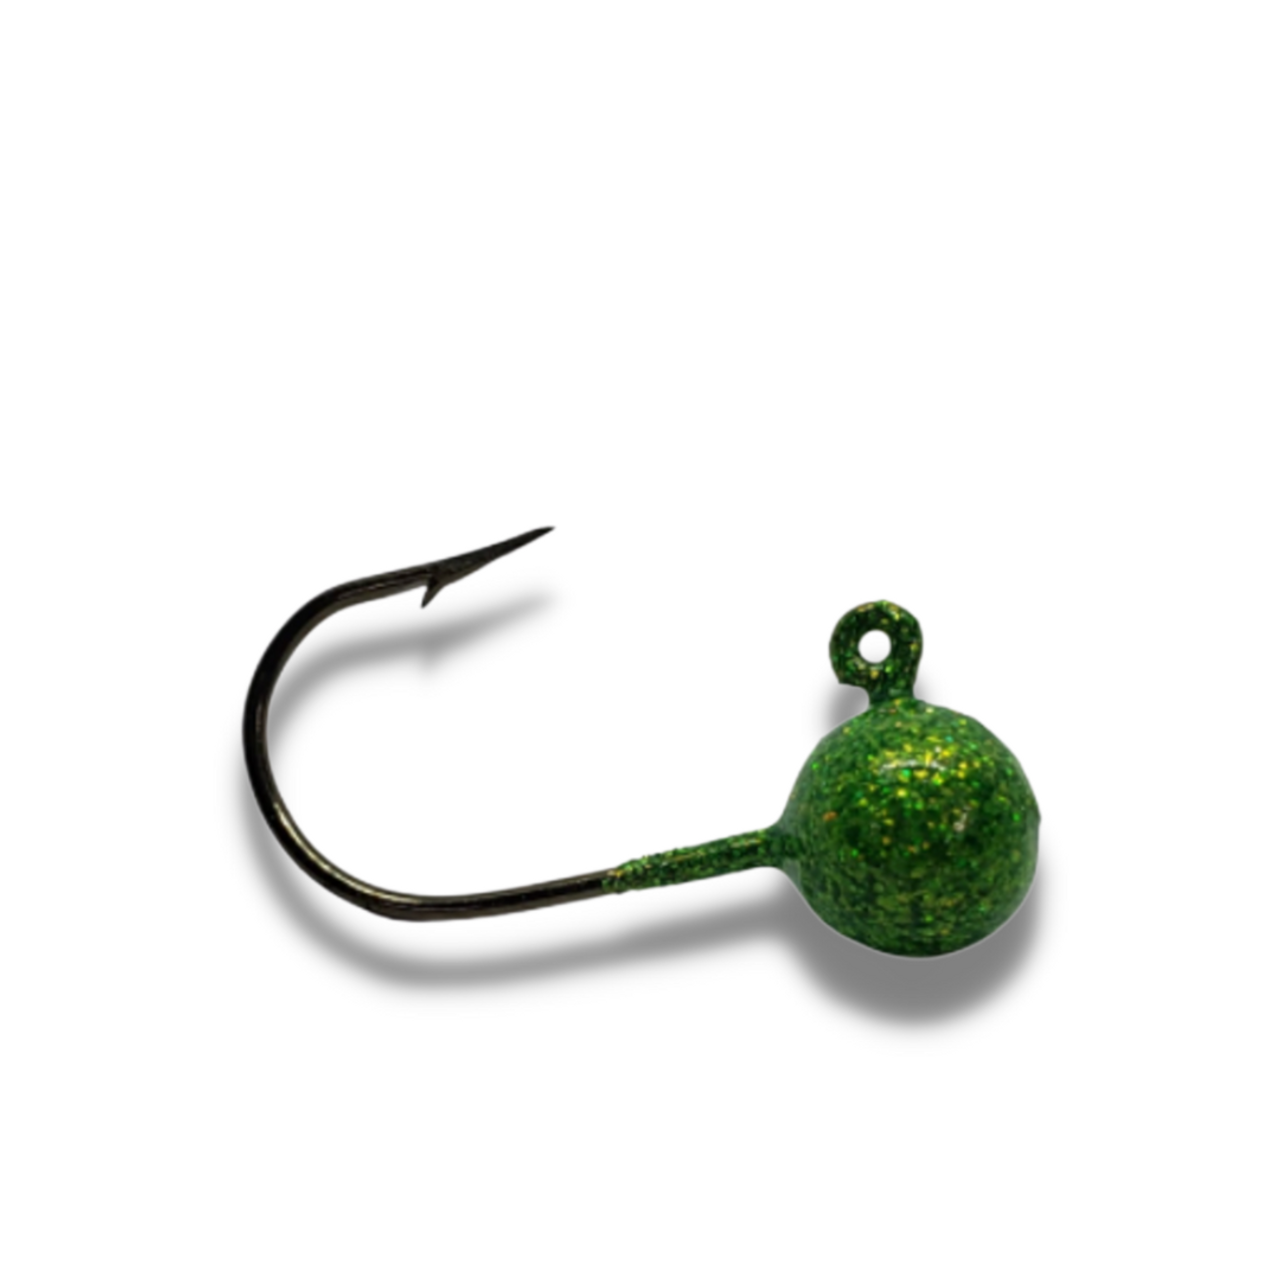 Short Shank 1/8 Ball Jigs
These short shank ball jigs are the perfect combination for those finicky walleye who are light biting. The small presentation paired with a minnow or leech assists with those bites when walleye are just sucking it in. Short shank jigs are also a favourite for using with live minnows. The added bonus of the short shank also means quicker hook set.